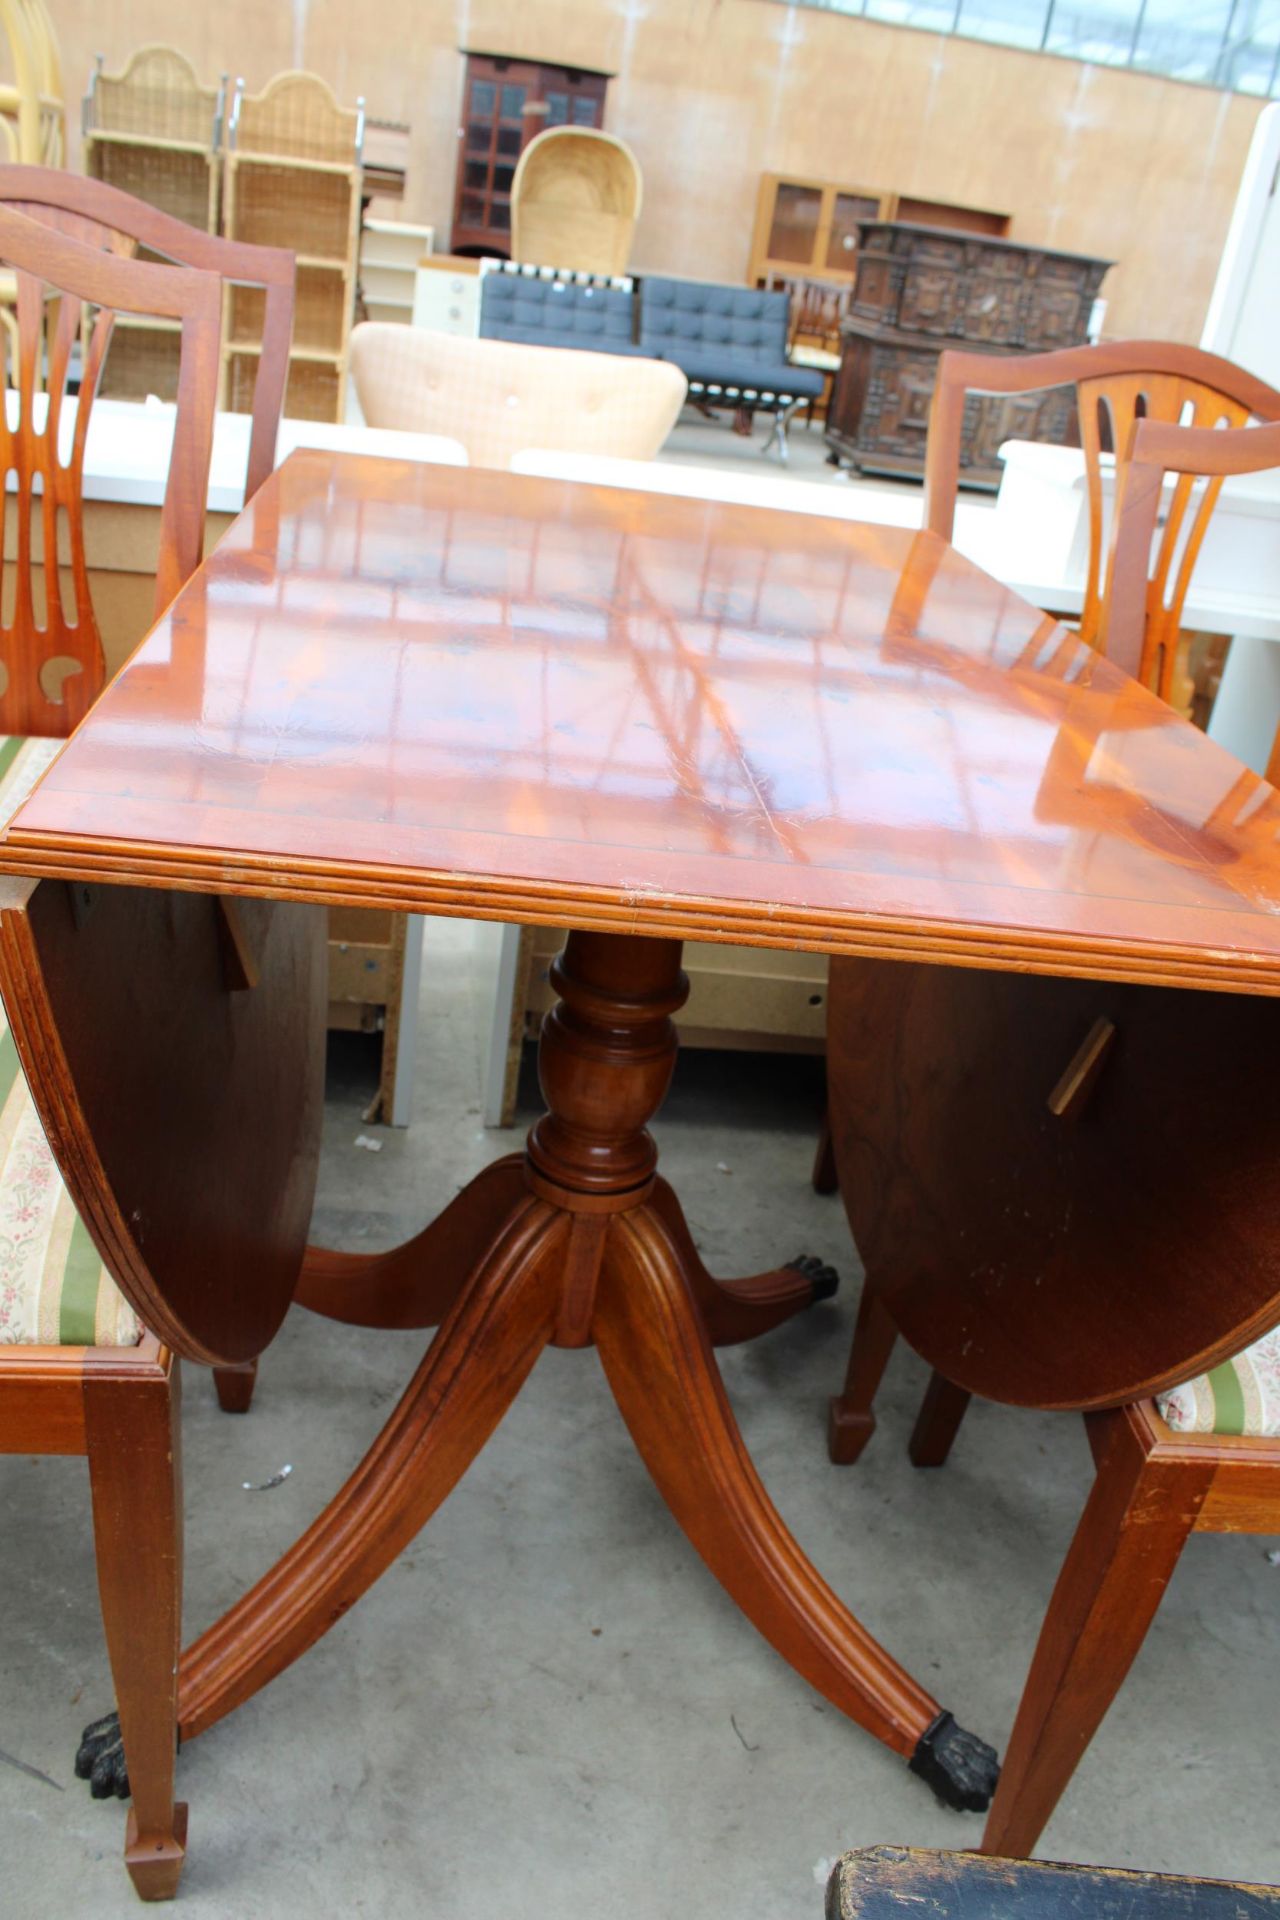 A MODERN YEW WOOD PEDESTAL DROP-LEAF DINING TABLE AND FOUR MATCHING CHAIRS - Image 2 of 5